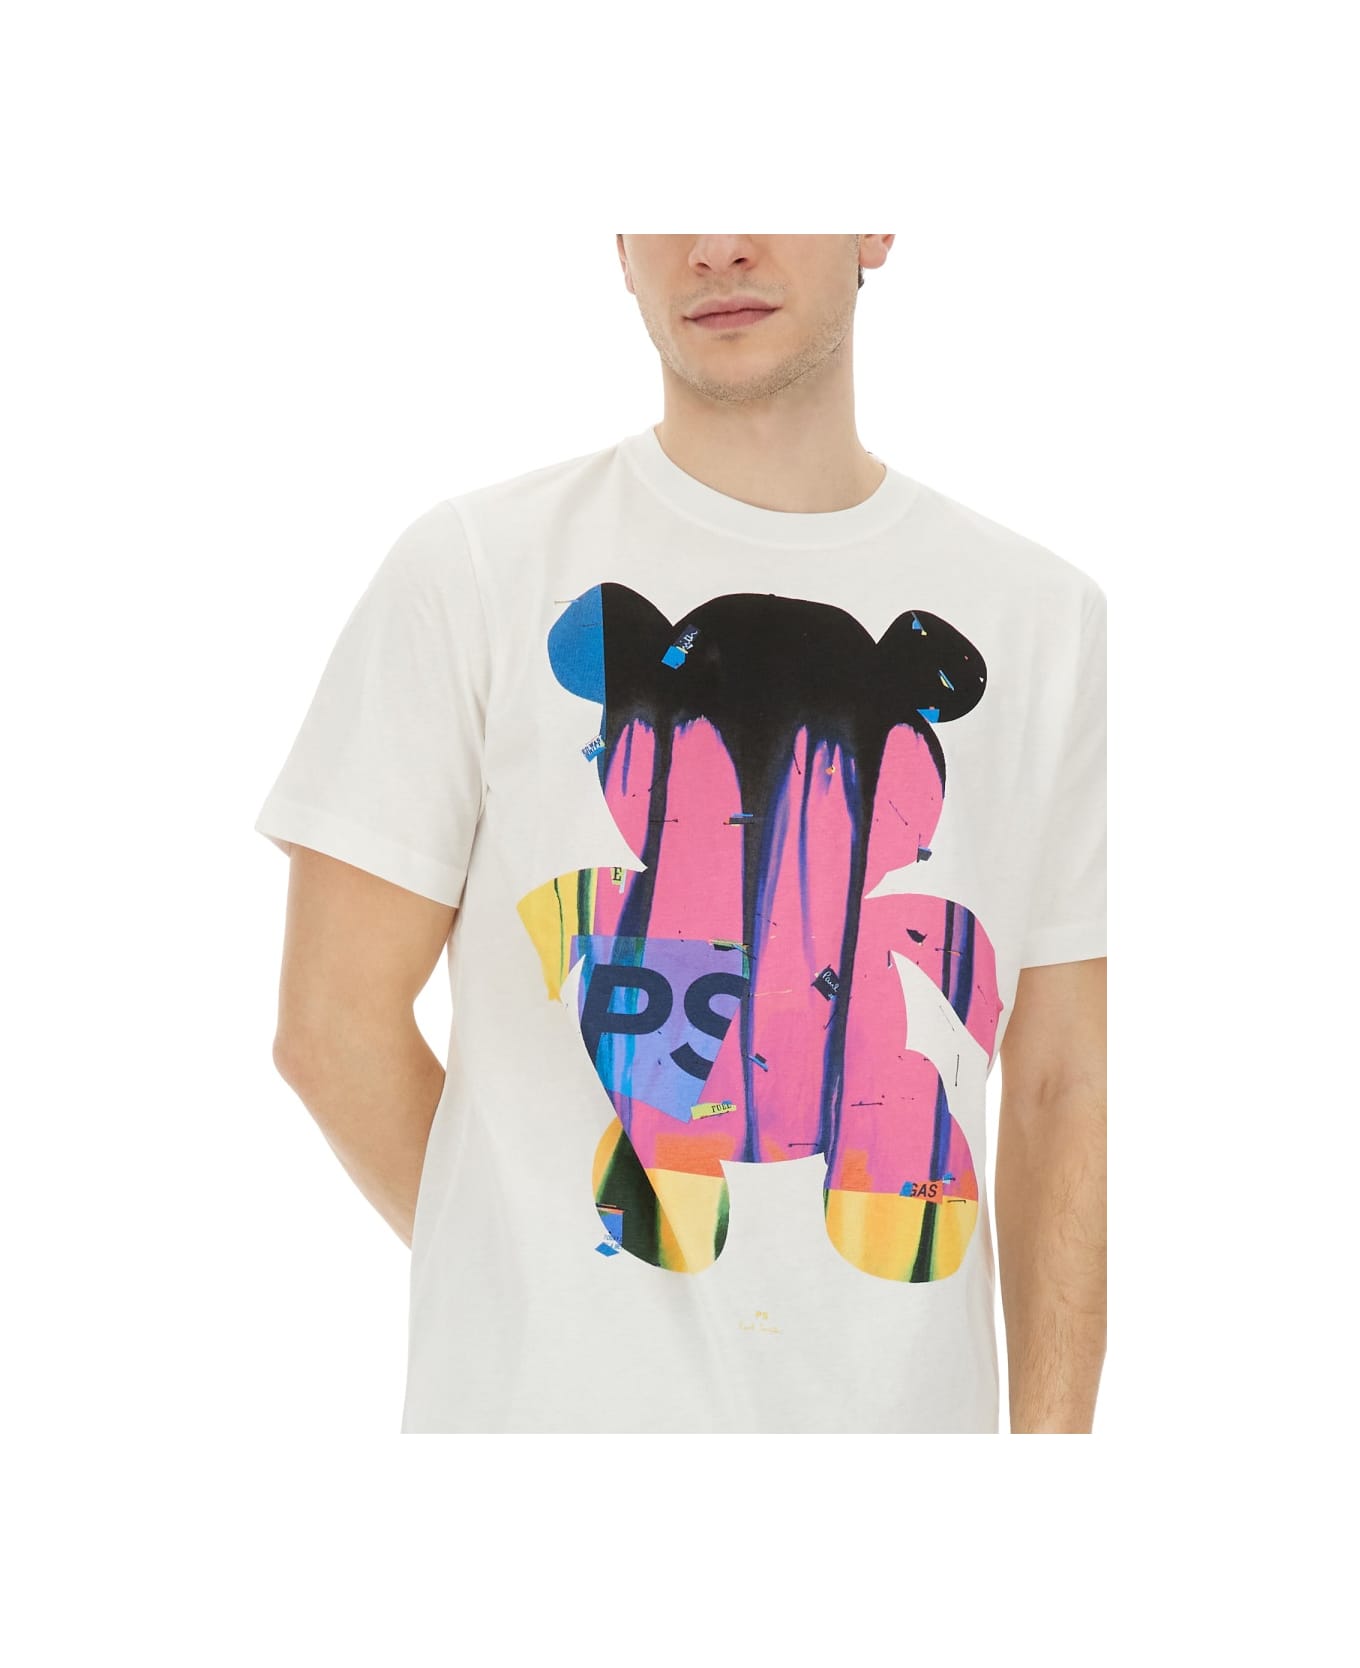 PS by Paul Smith "teddy" T-shirt - WHITE